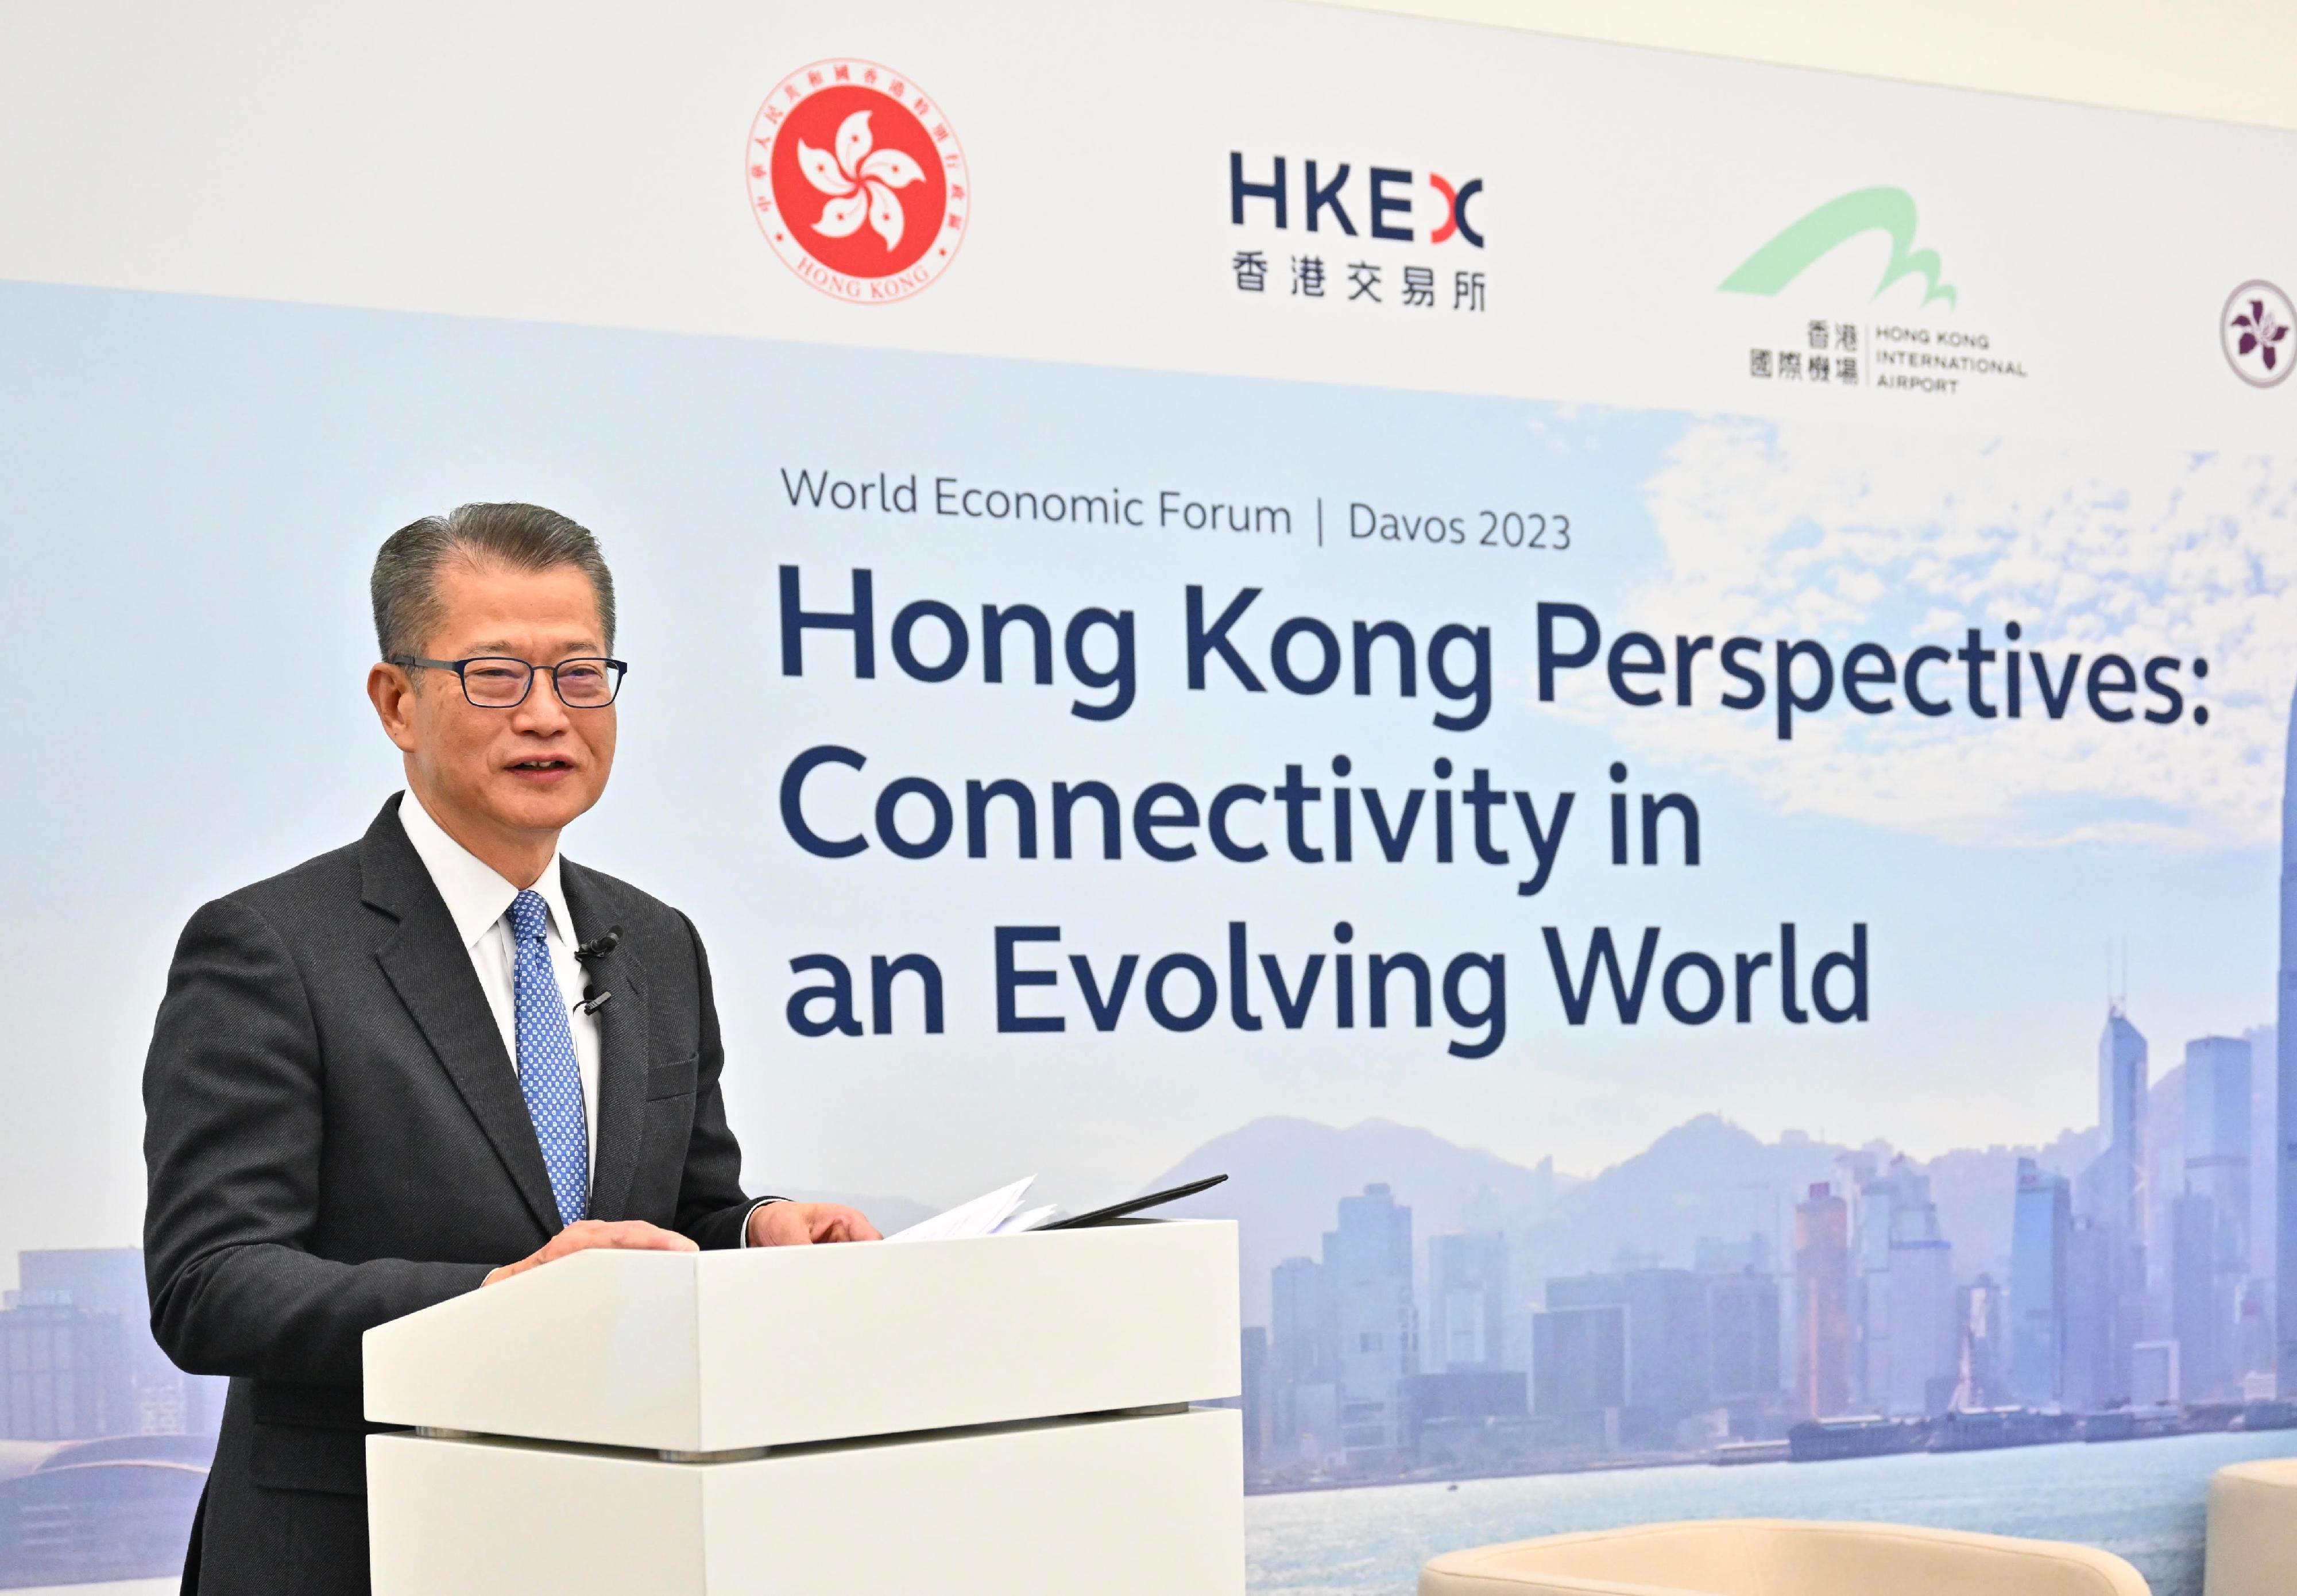 The Financial Secretary, Mr Paul Chan, continued his visit in Davos, Switzerland, today (January 18, Davos time). Photo shows Mr Chan giving a speech at a breakfast meeting "Hong Kong Perspectives: Connectivity in an Evolving World" co-organised by the Hong Kong Special Administrative Region Government and the Hong Kong Exchanges and Clearing Limited, and supported by the Airport Authority Hong Kong, the Hong Kong Monetary Authority and MTR Corporation Limited.